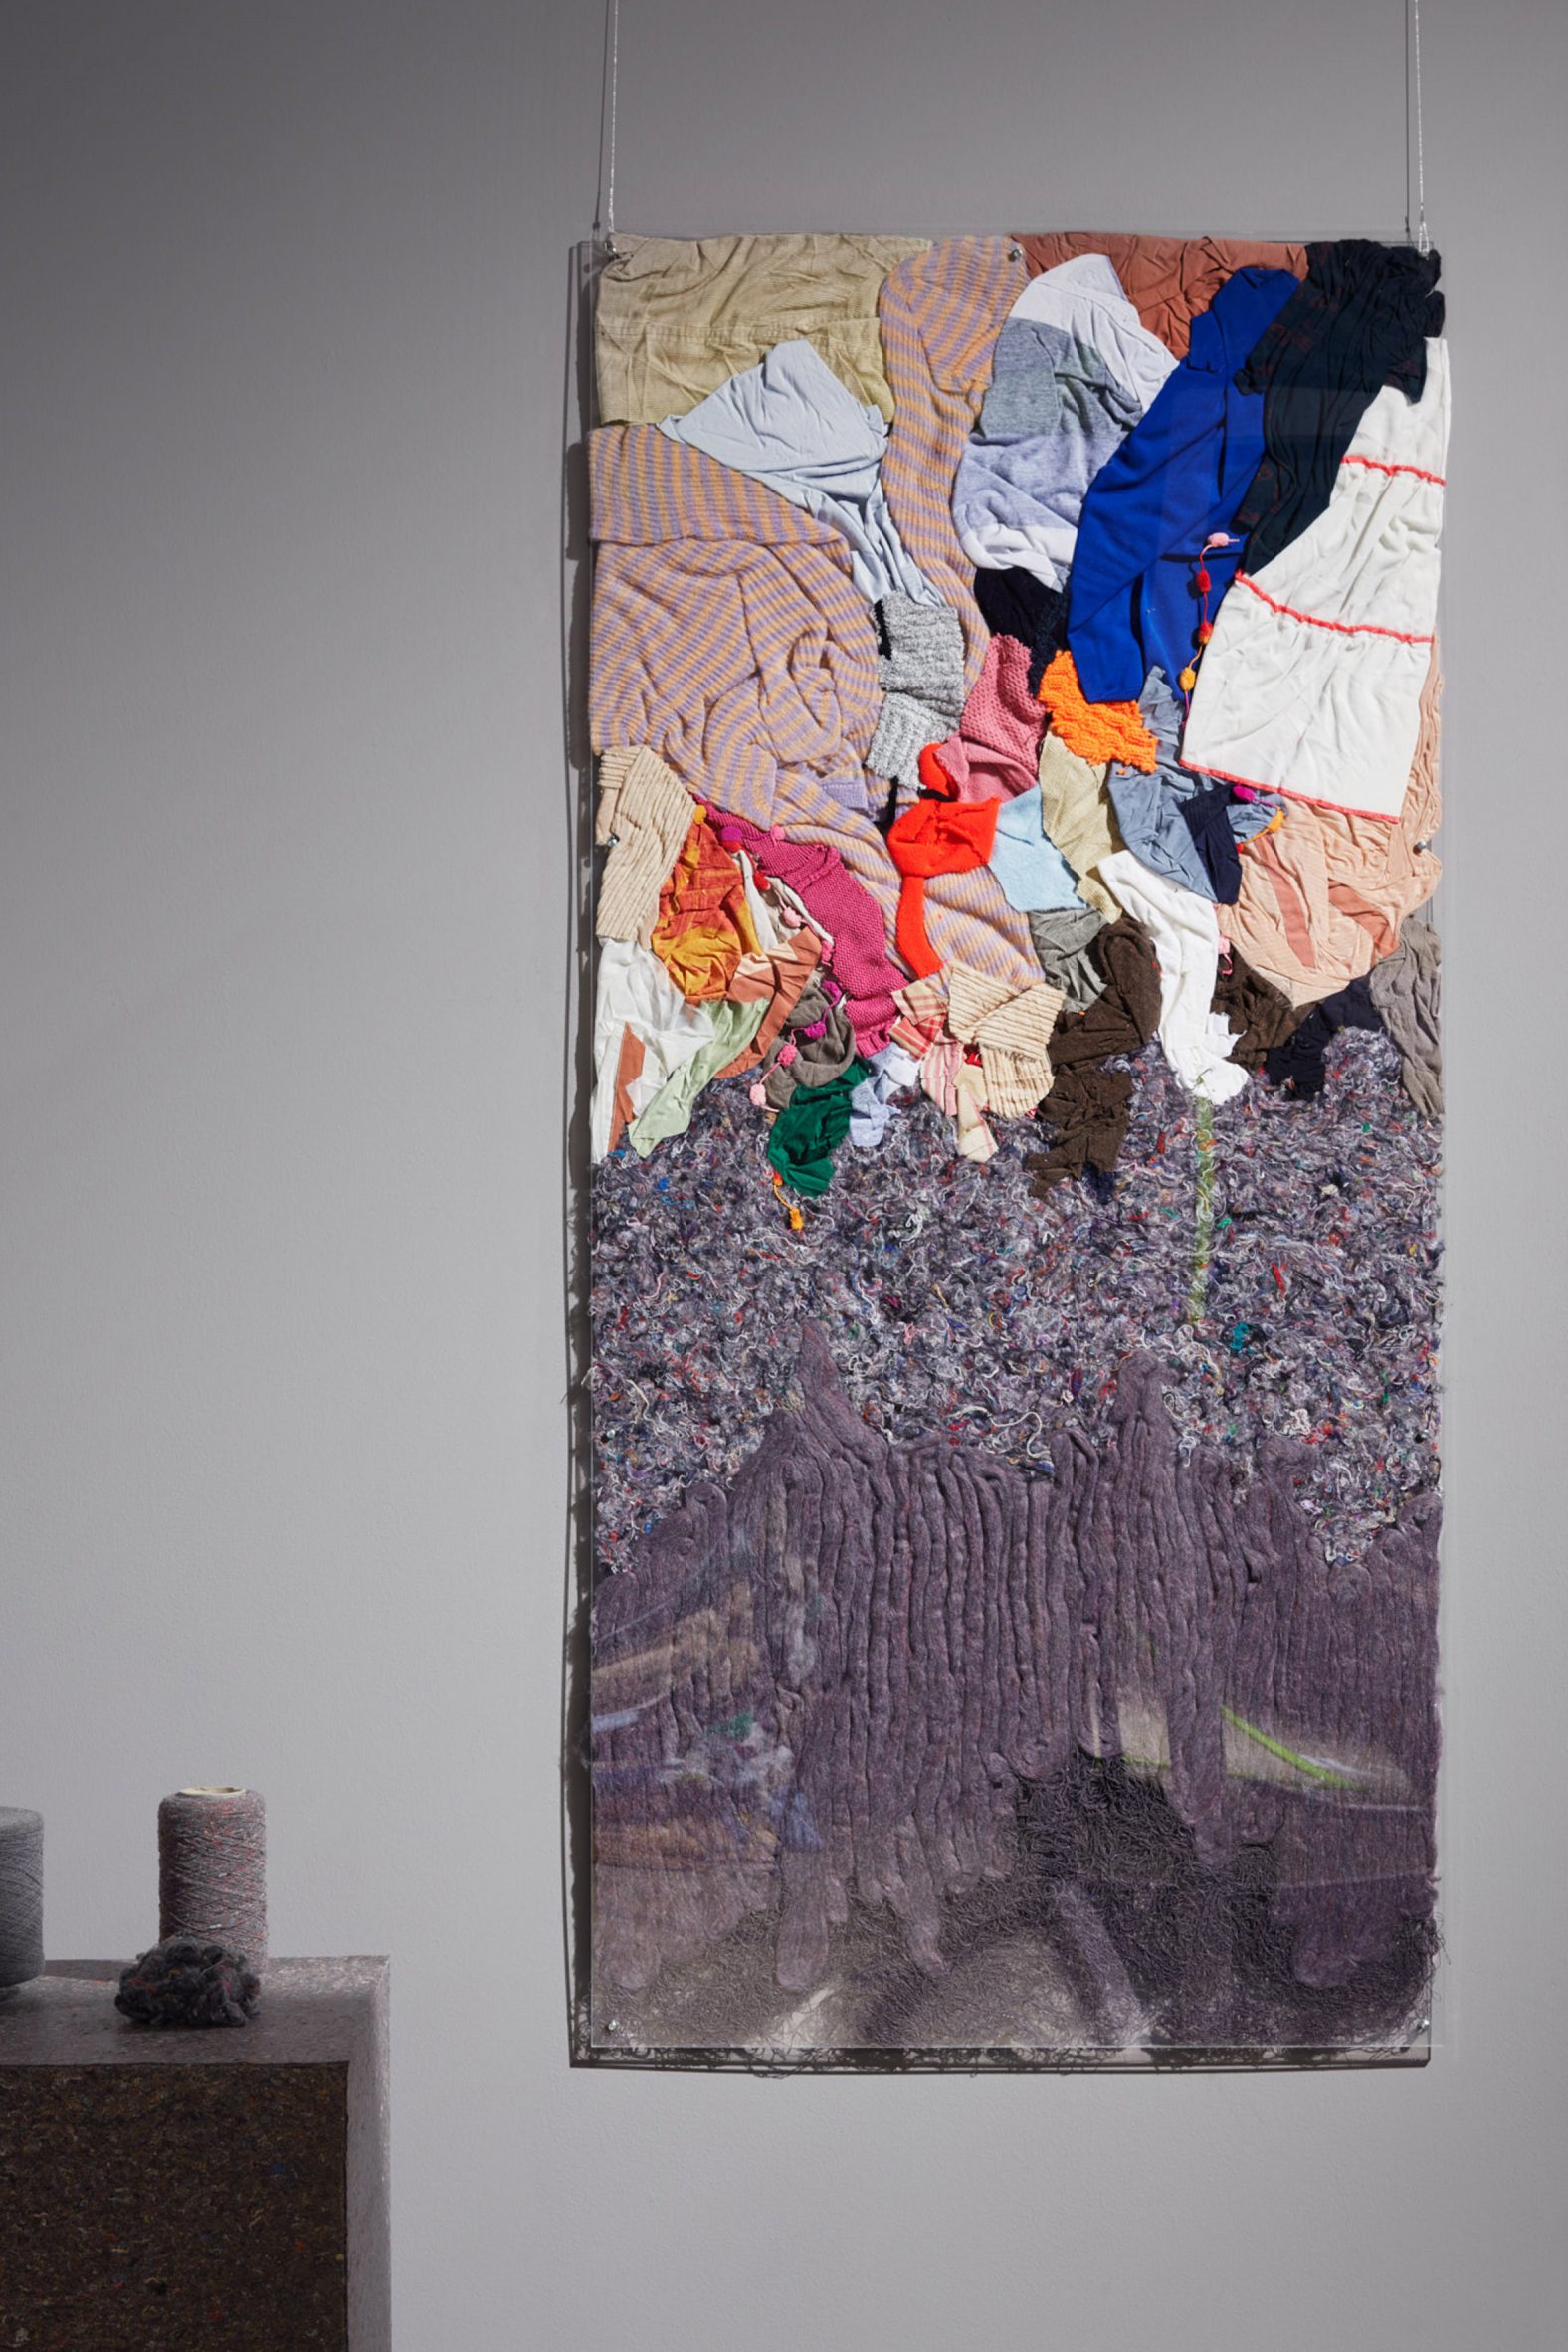 Wall hanging showing mixed garments at the top, unravelling into a grey mix of fibres and then becoming yarn